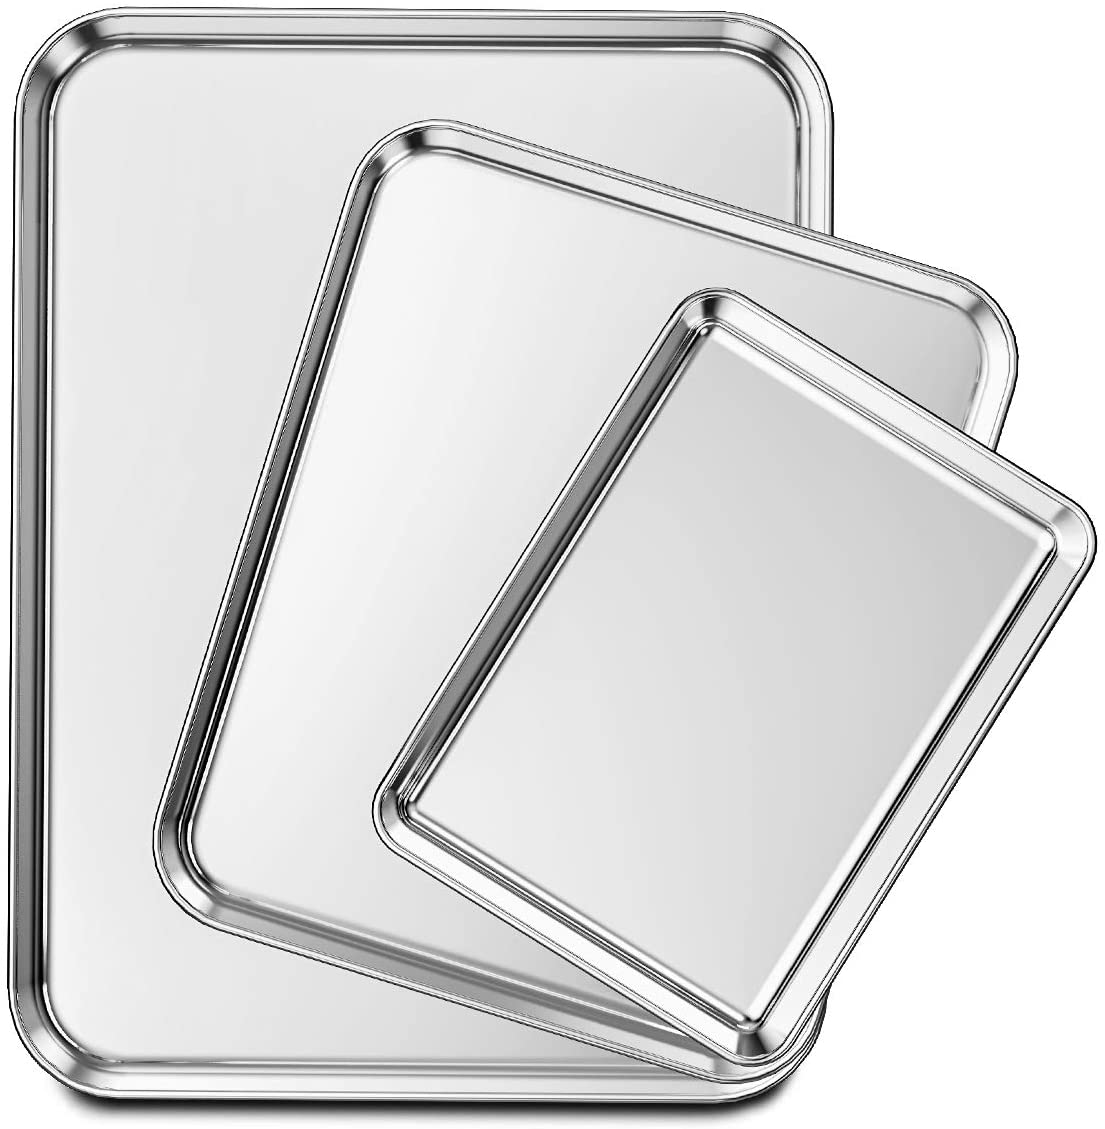 Wildone Assorted Sizes Cookie Sheets Stainless Steel Bakeware, 3-Piece